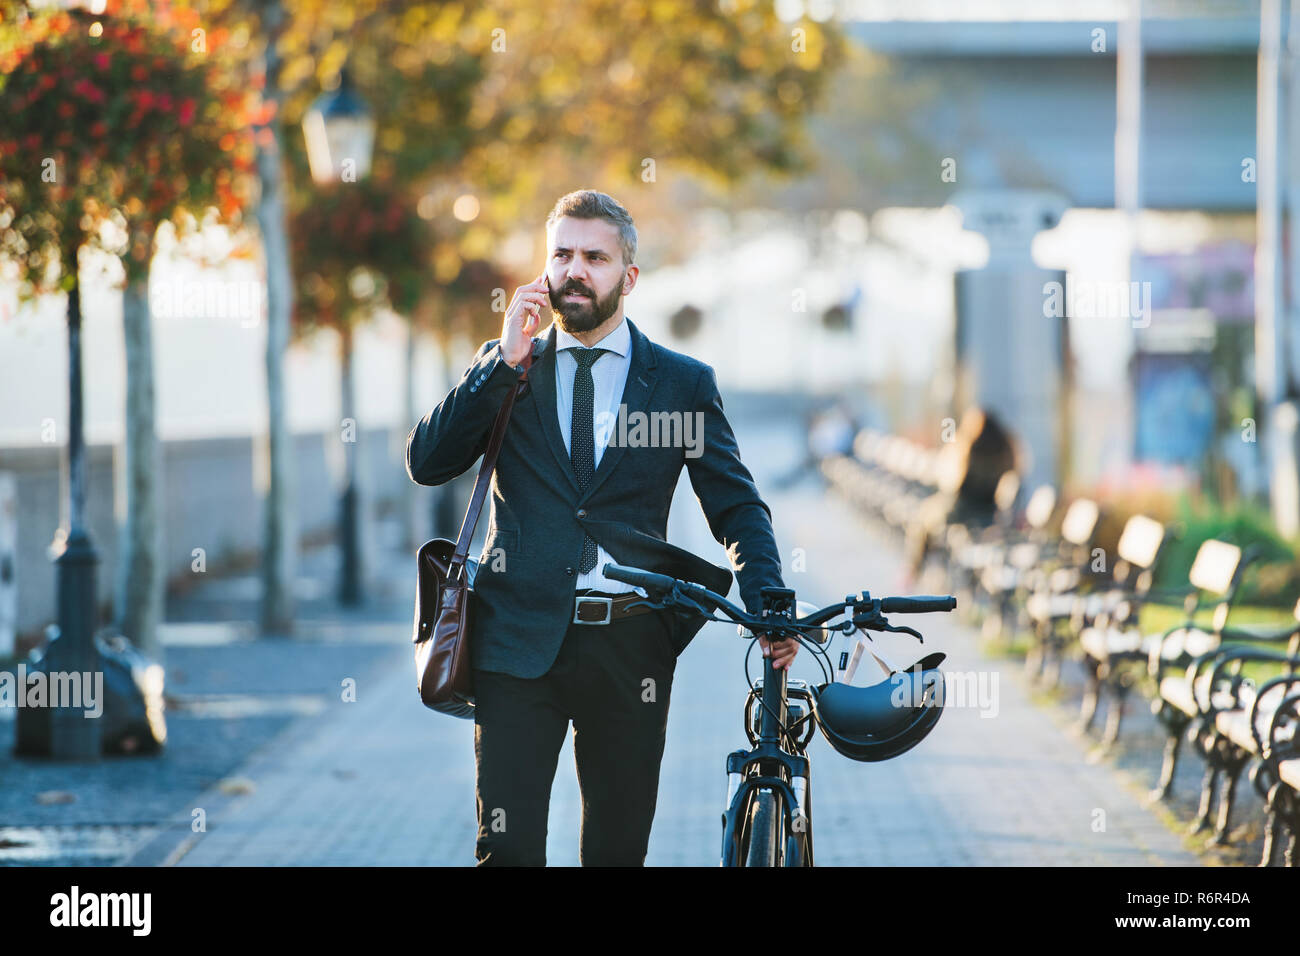 A businessman commuter with bicycle walking home from work in city, using smartphone. Stock Photo